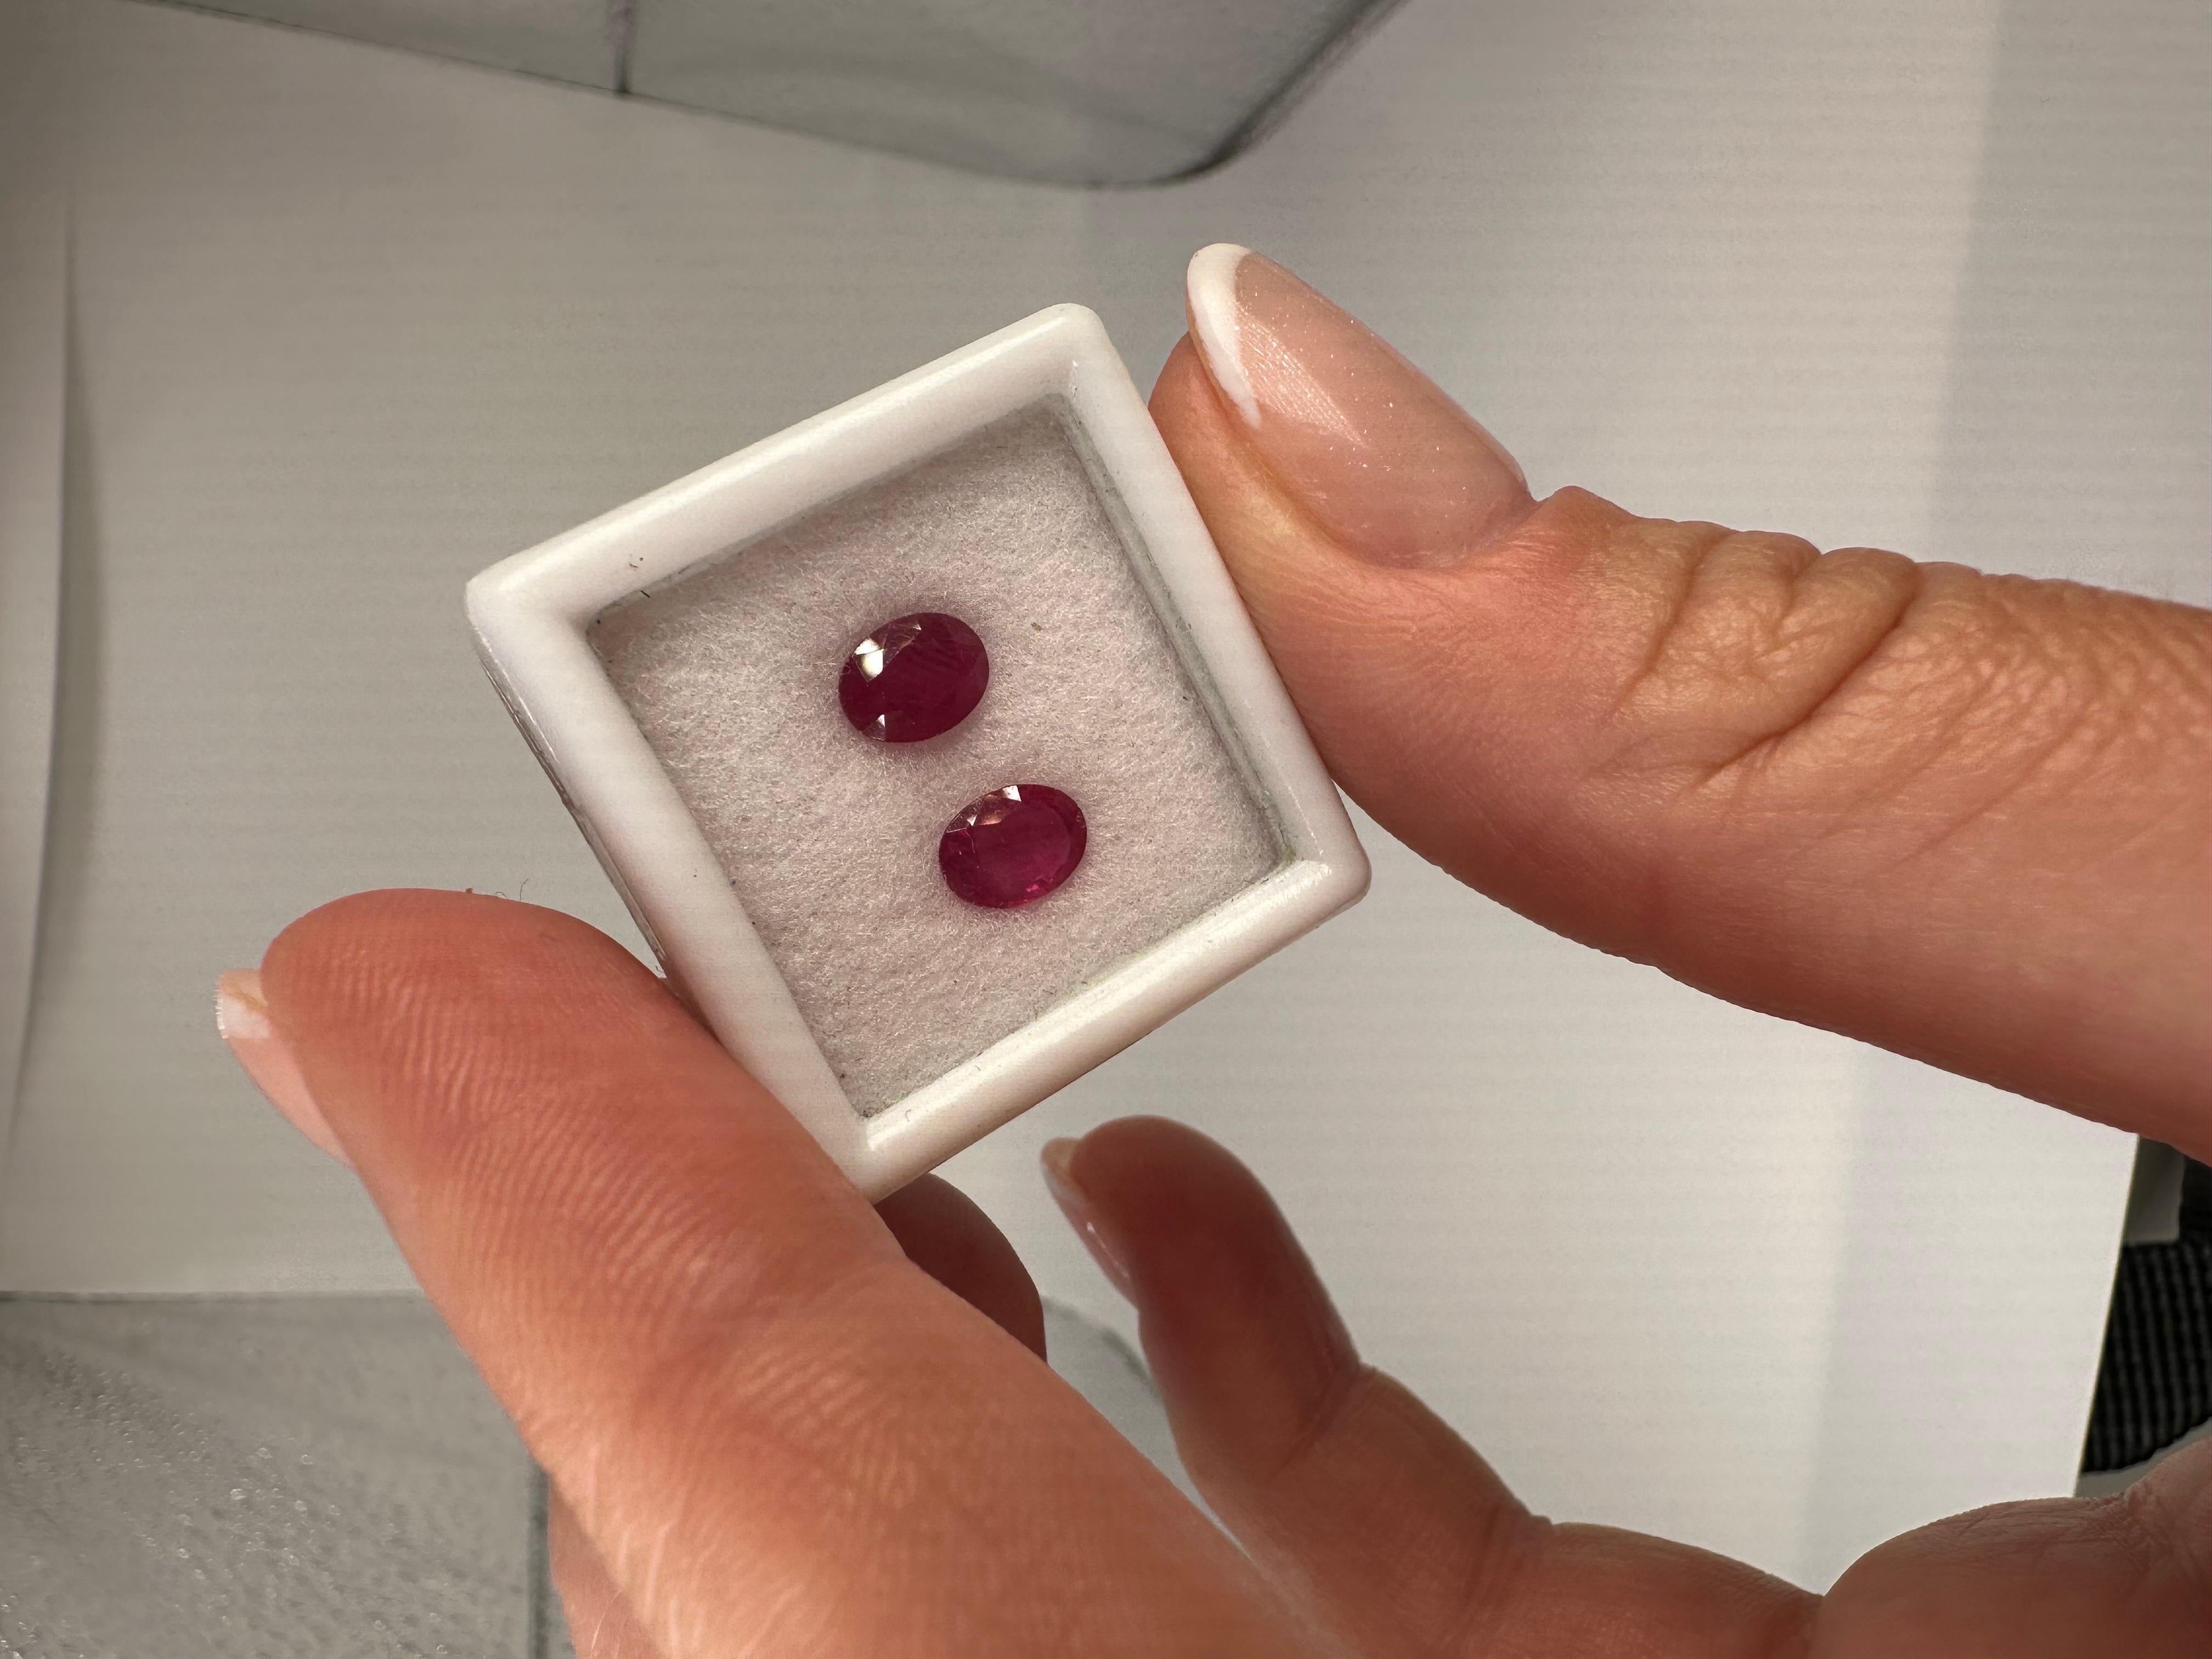 Rare matching pair of rubies, untreated and certified.

NATURAL GEMSTONE(S): NATURAL RUBY 
Clarity/Color: Slightly Included/Pinkish Red
Cut: Rectangular 6.5x5mm
Treatment: none
MTP


WHAT YOU GET AT STAMPAR JEWELERS:
Stampar Jewelers, located in the